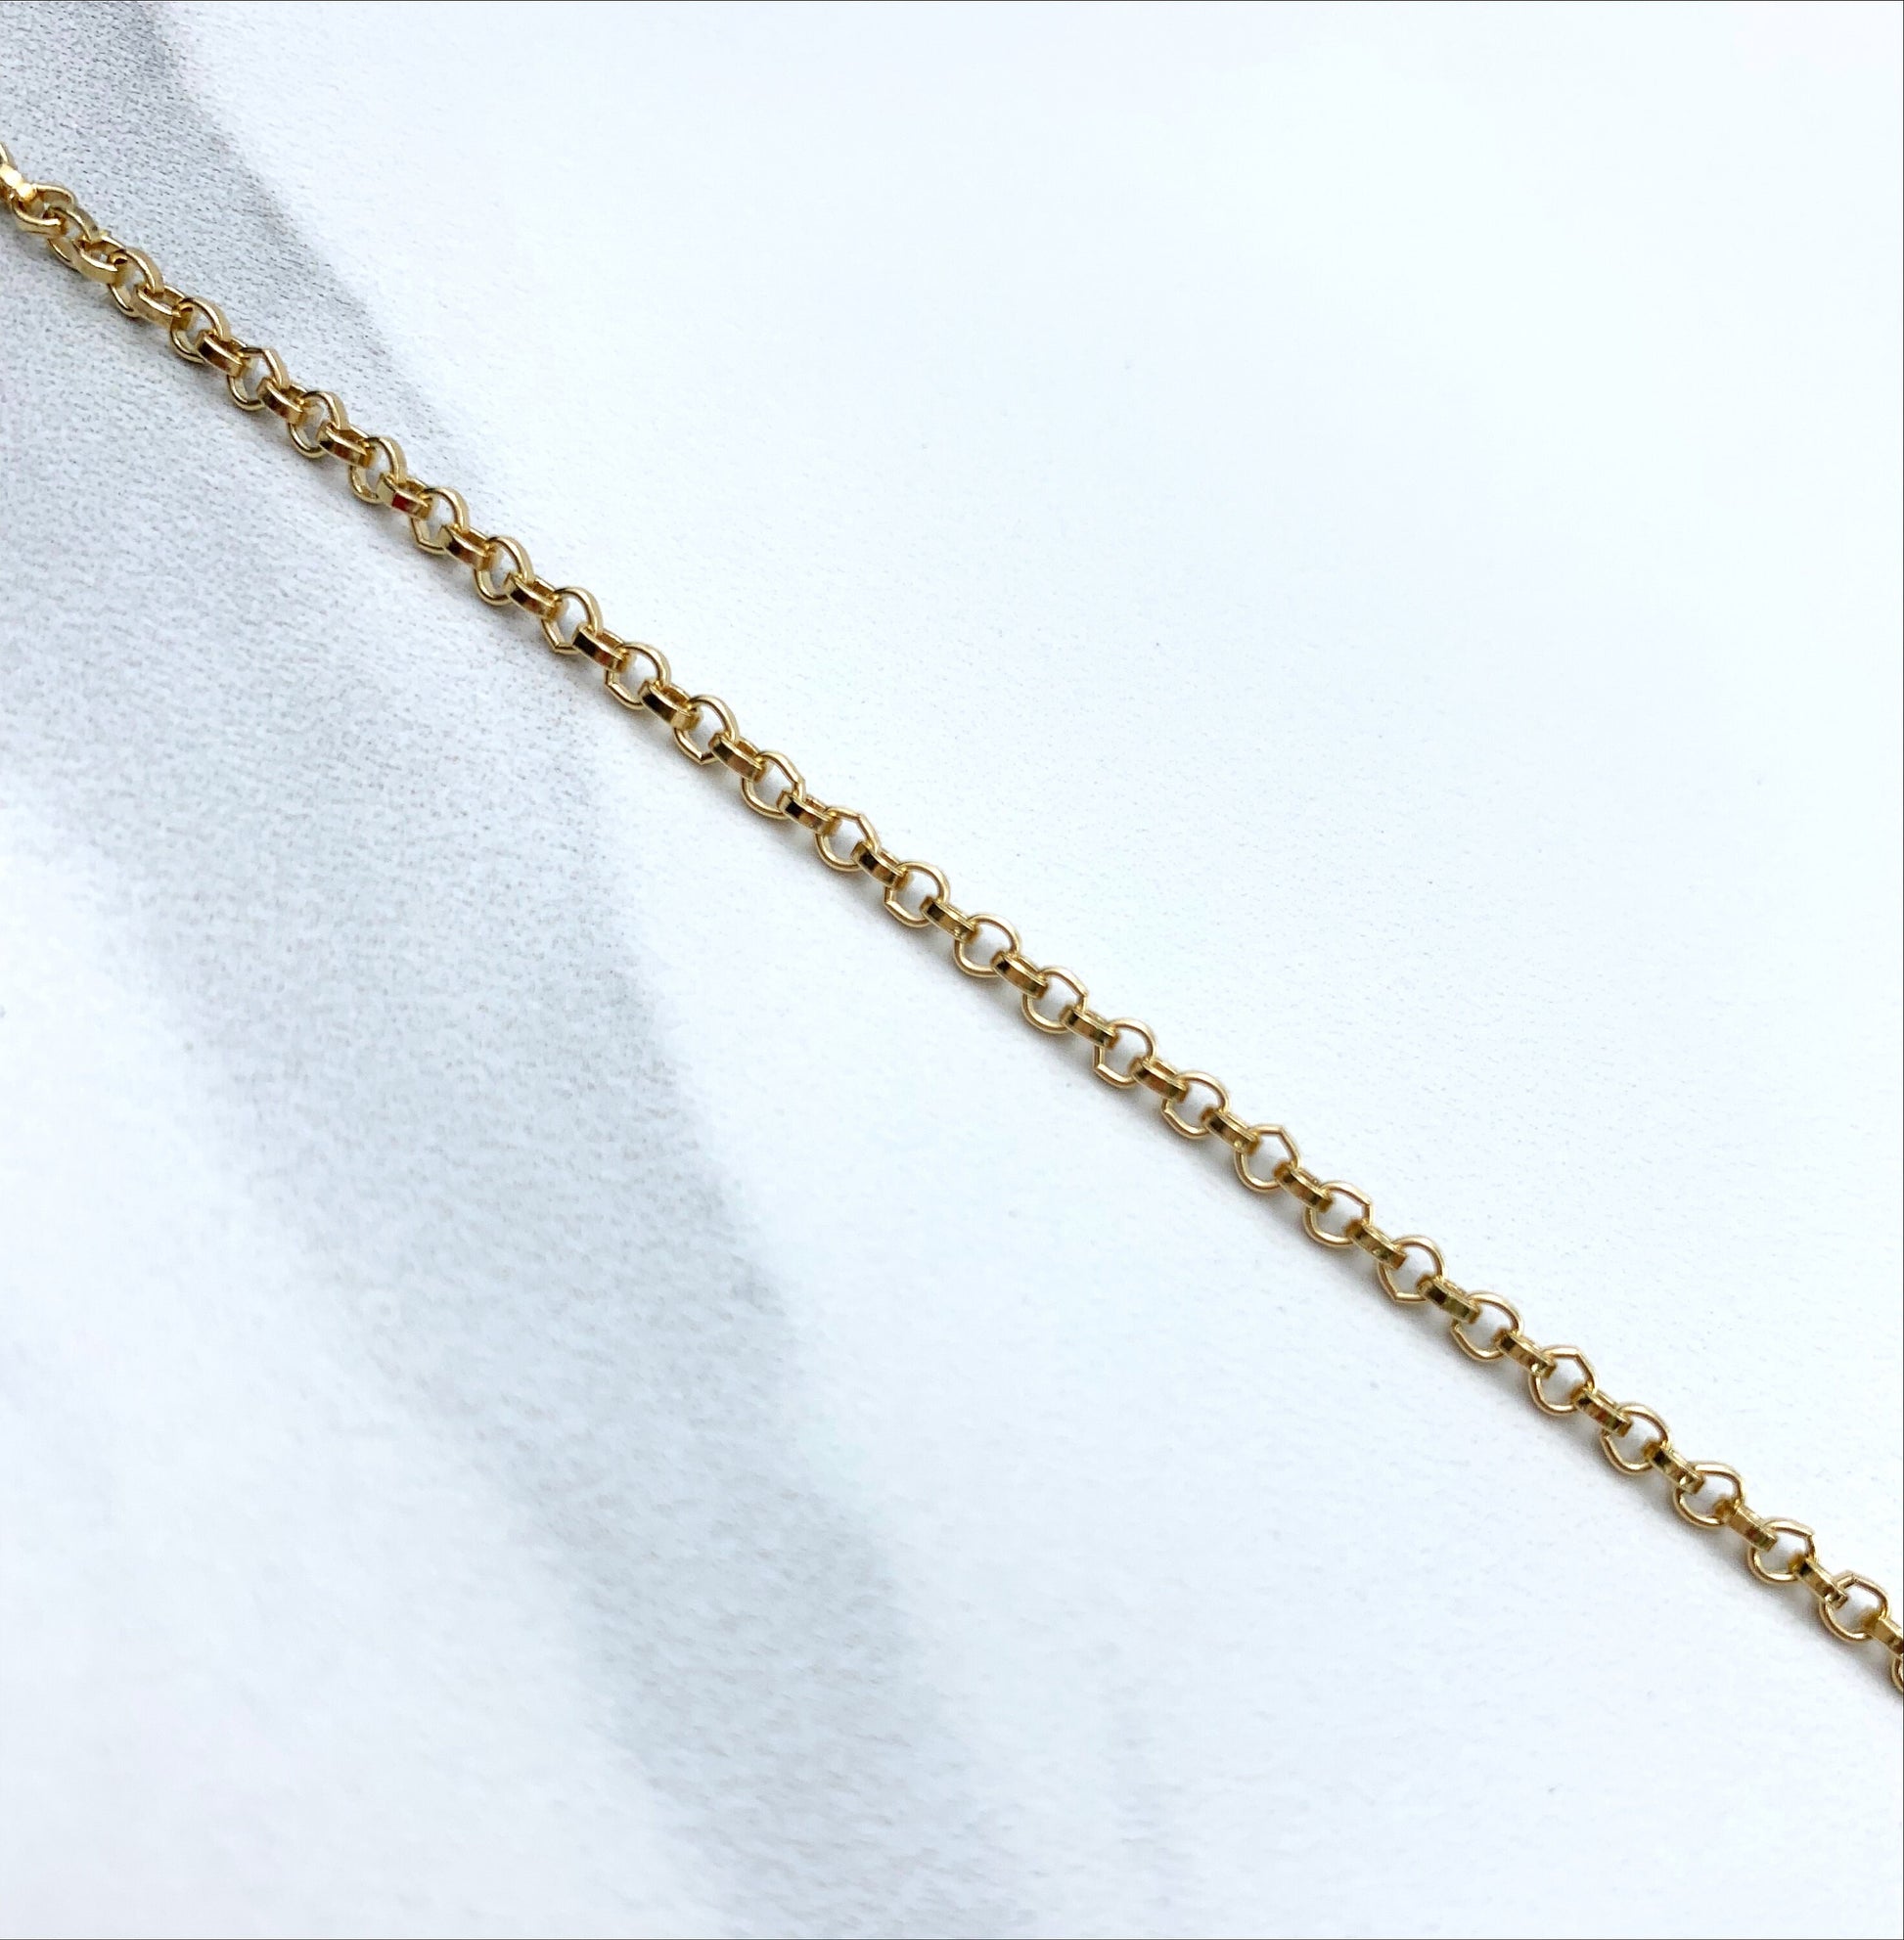 18k Gold Filled 2mm Rolo Chain with Clear Cubic Zirconia Butterfly Shape Design Charm Anklet, Wholesale Jewelry Making Supplies